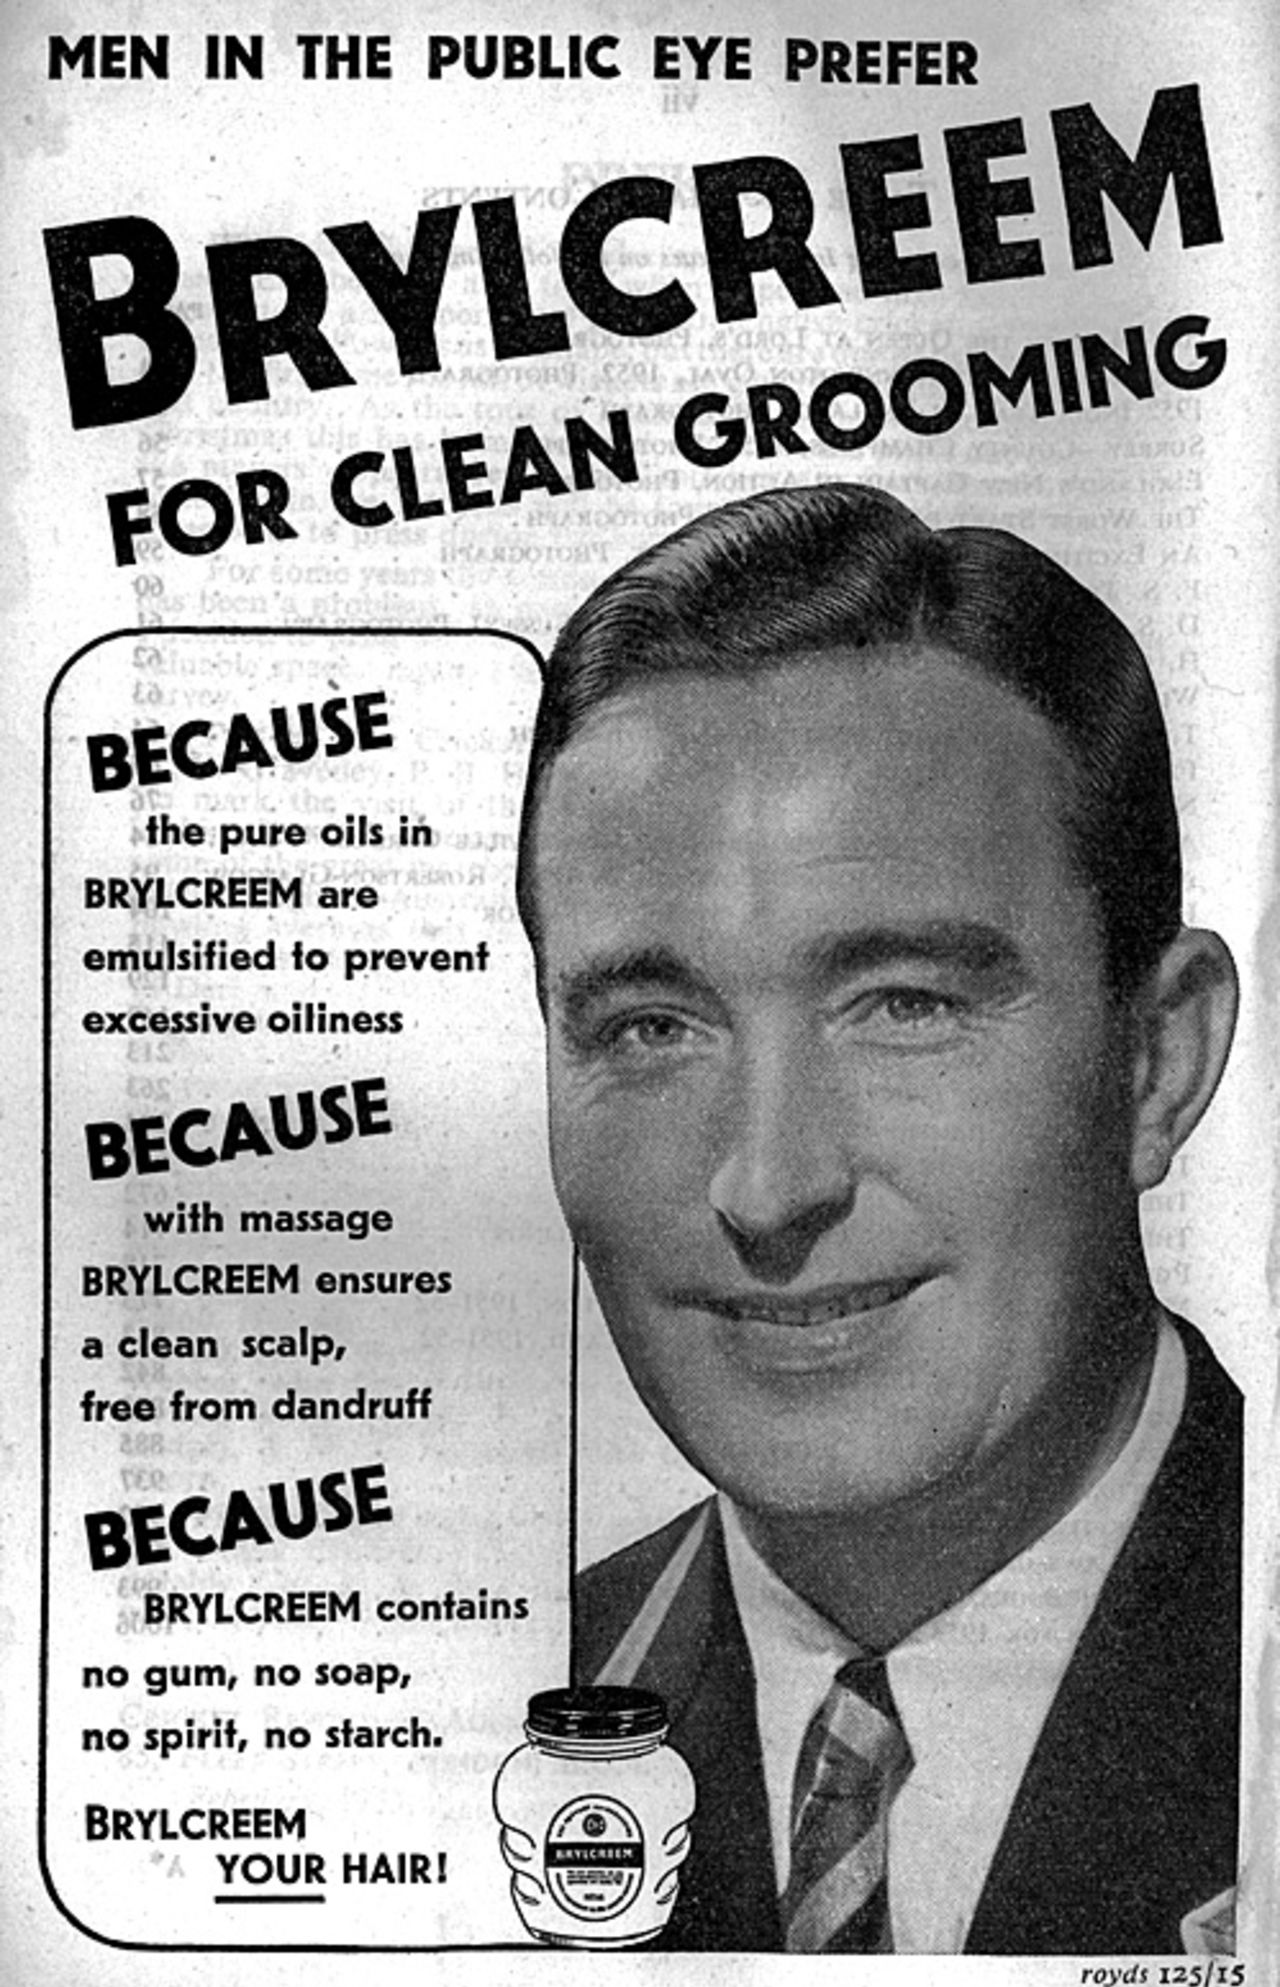 Denis Compton, the face of Brylcreem after the war